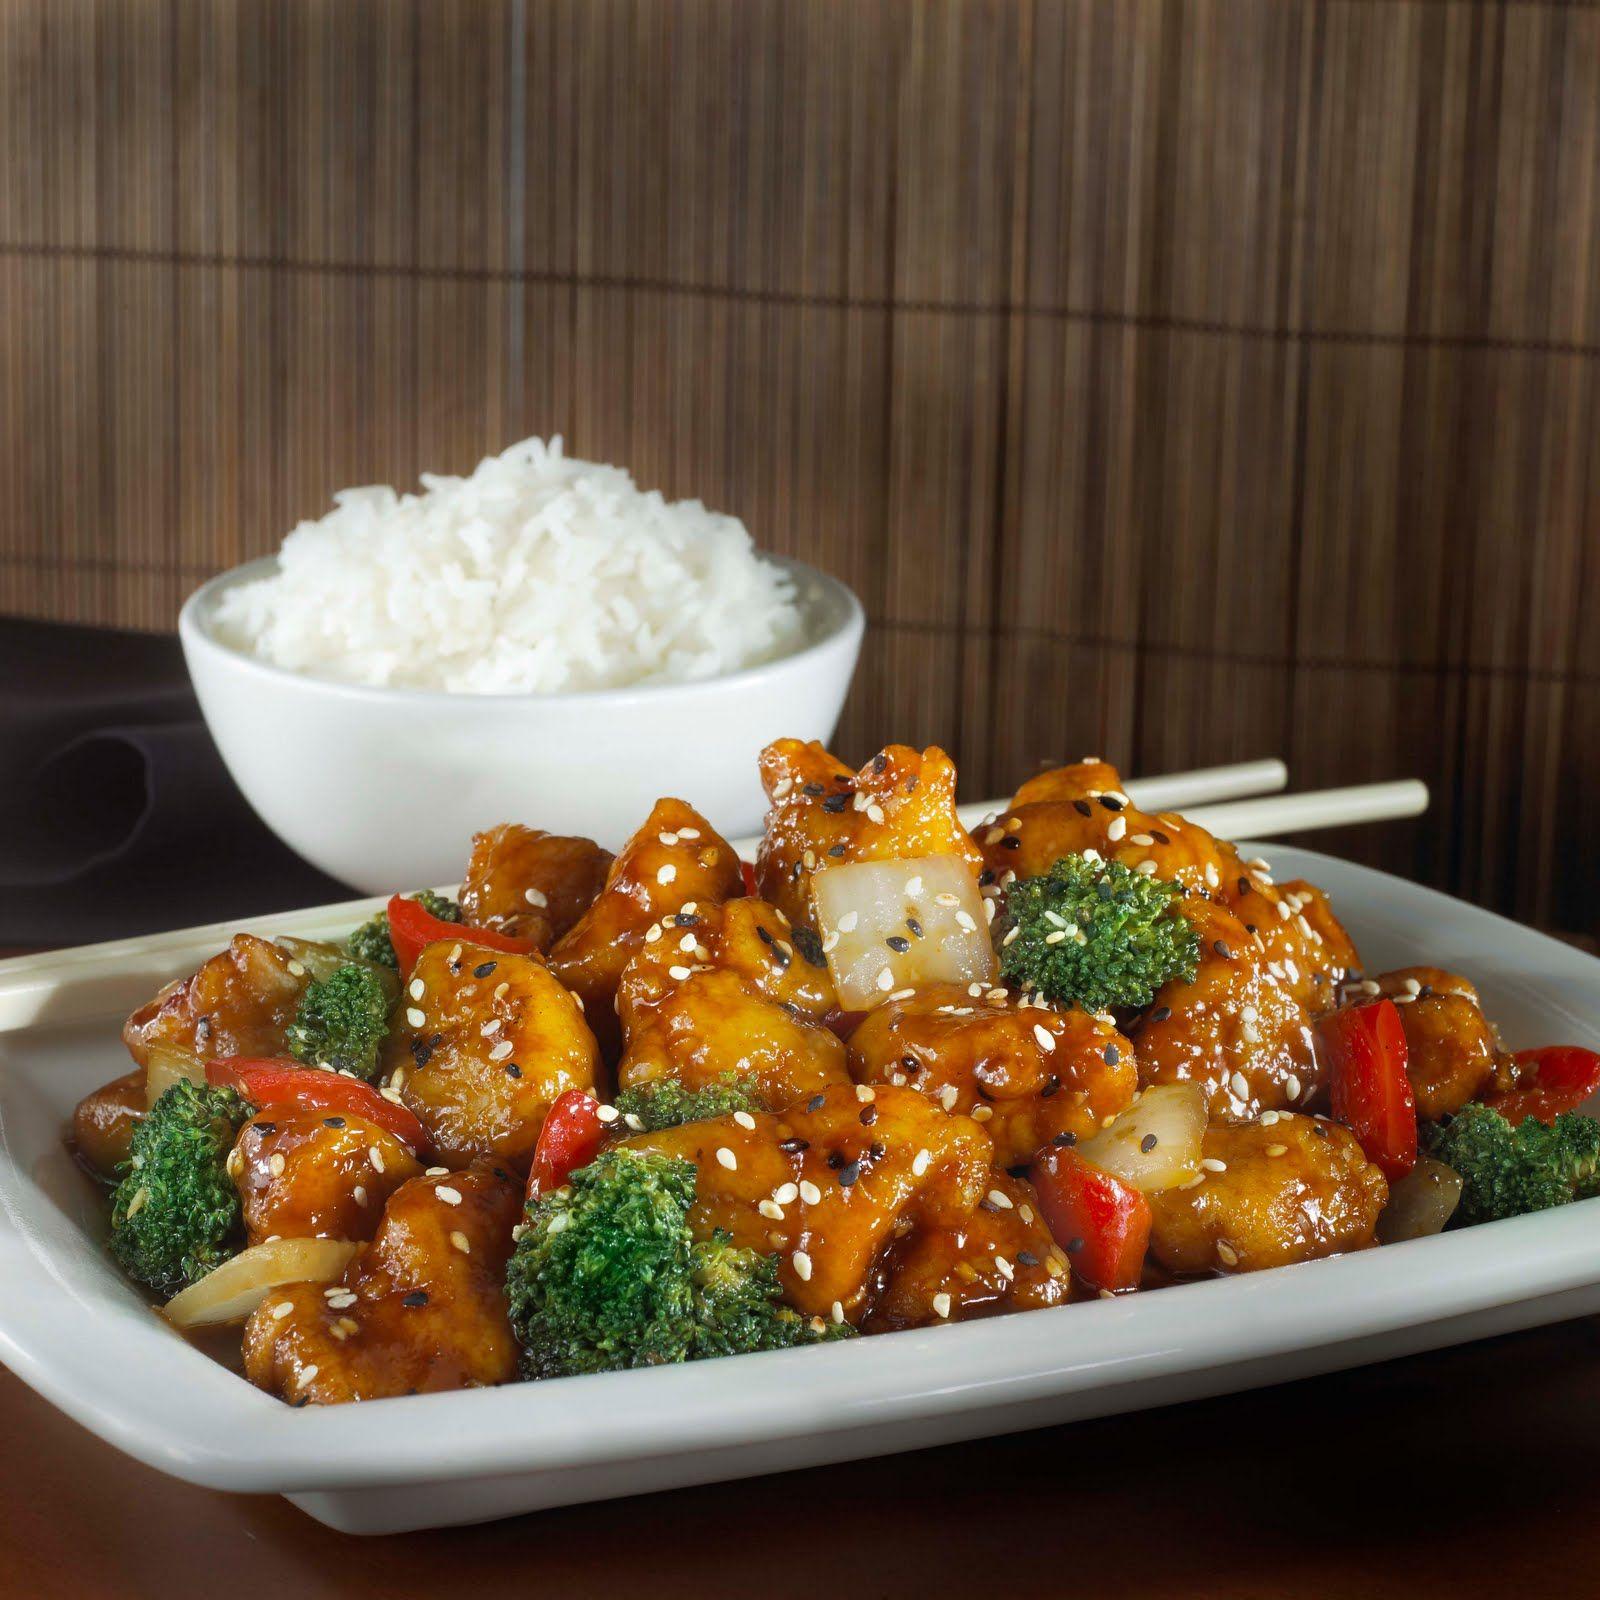 Chinese Food image Sesame Chicken HD wallpaper and background